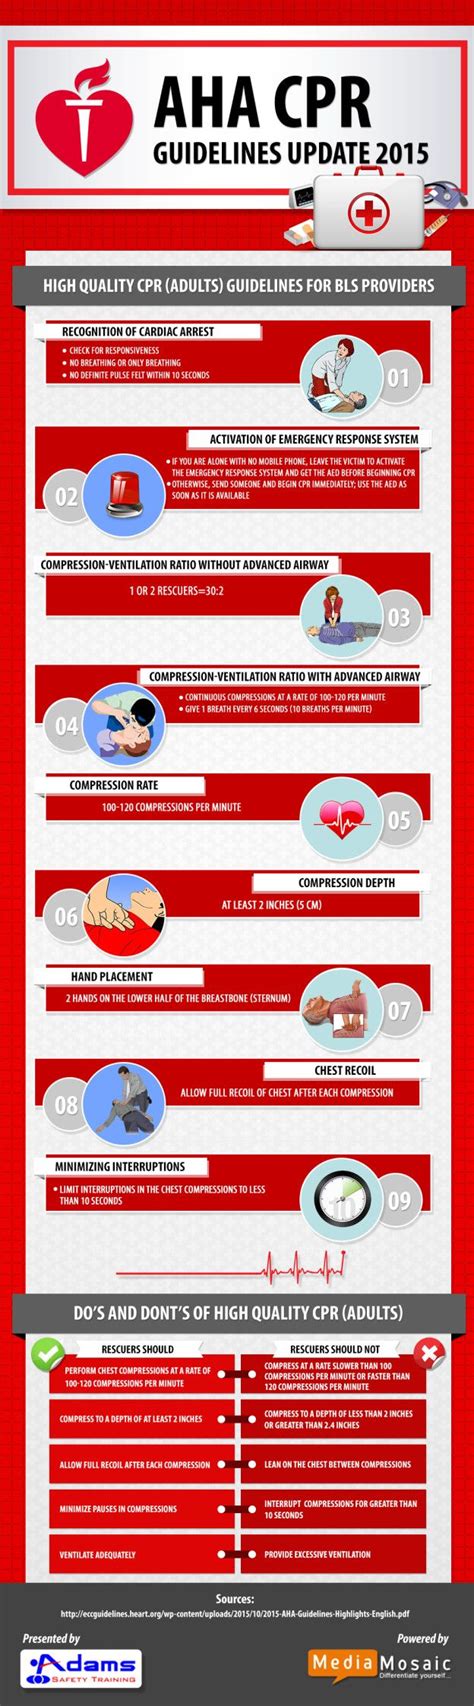 The Infographic Describes The Key Elements Of 2015 Aha Guidelines